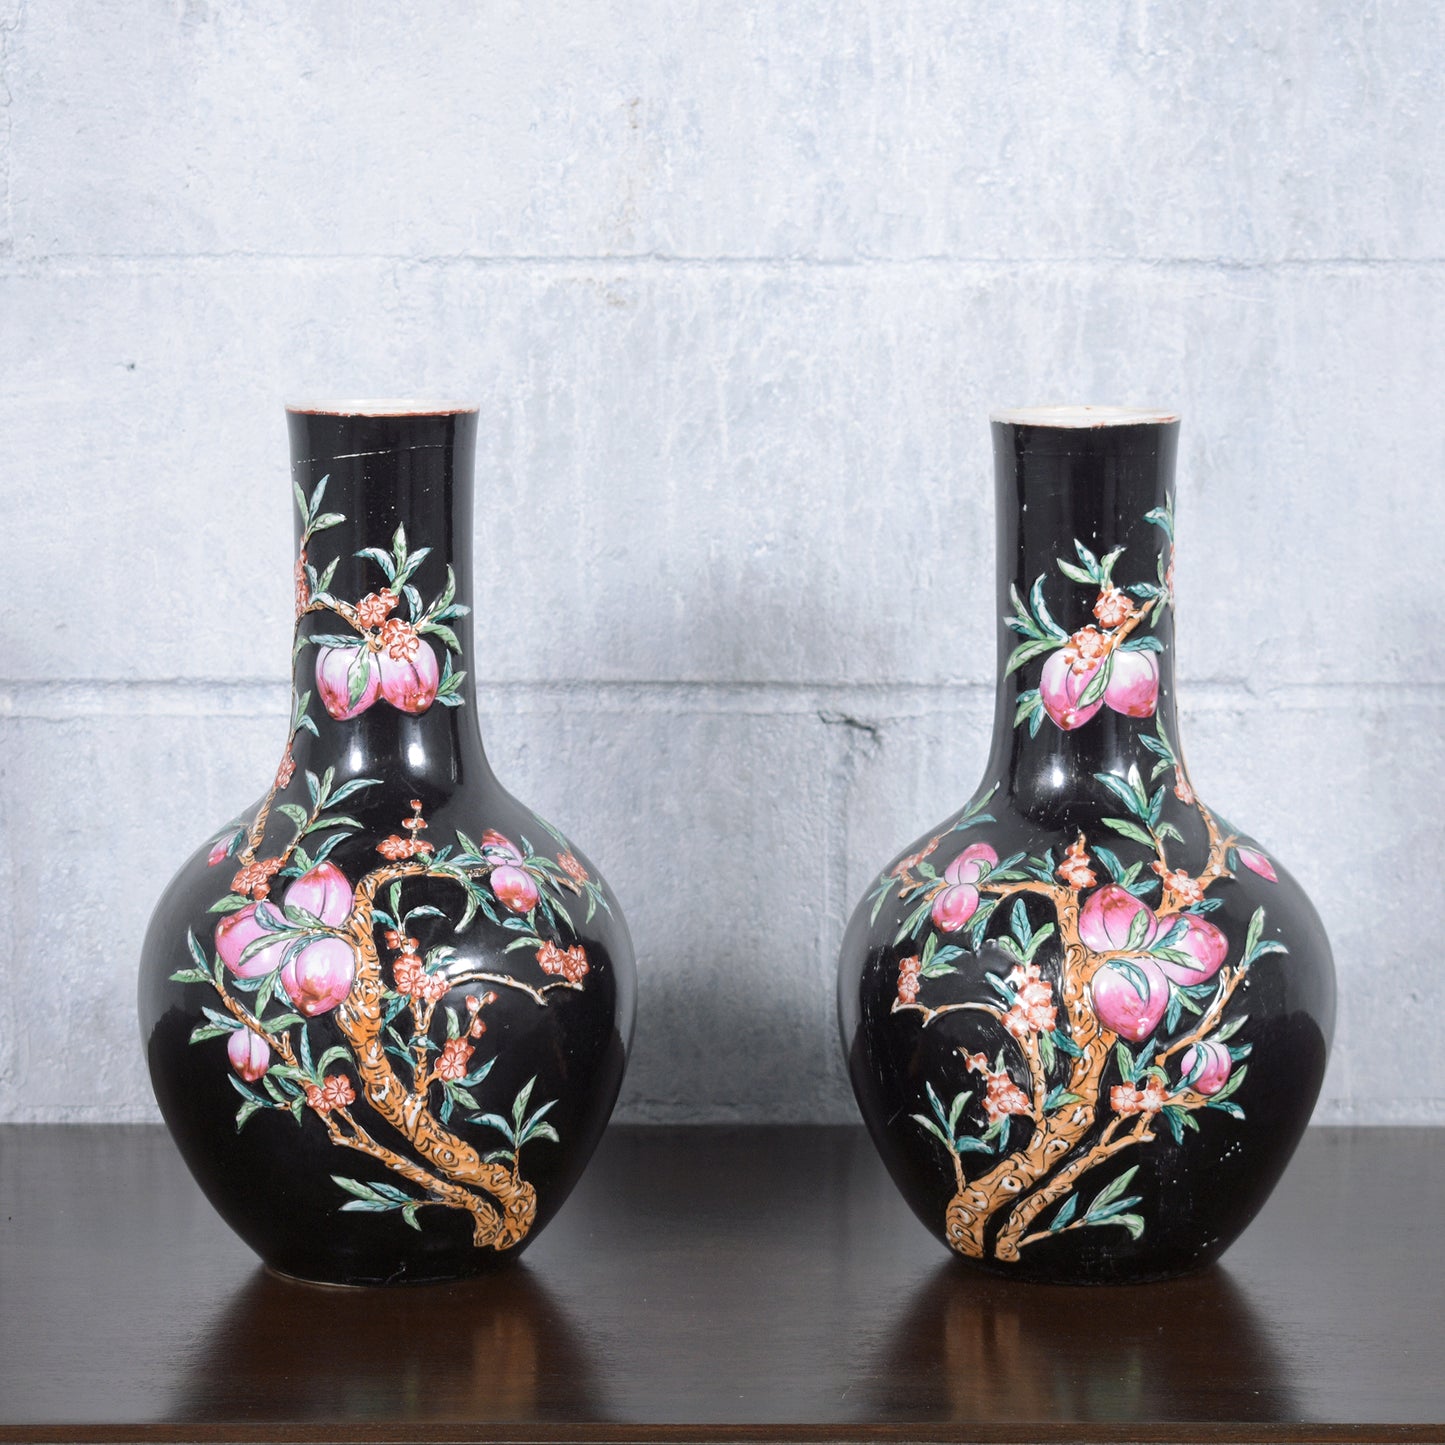 Pair of Vintage Hand-Painted Chinese Porcelain Vases with Floral & Fruit Pattern